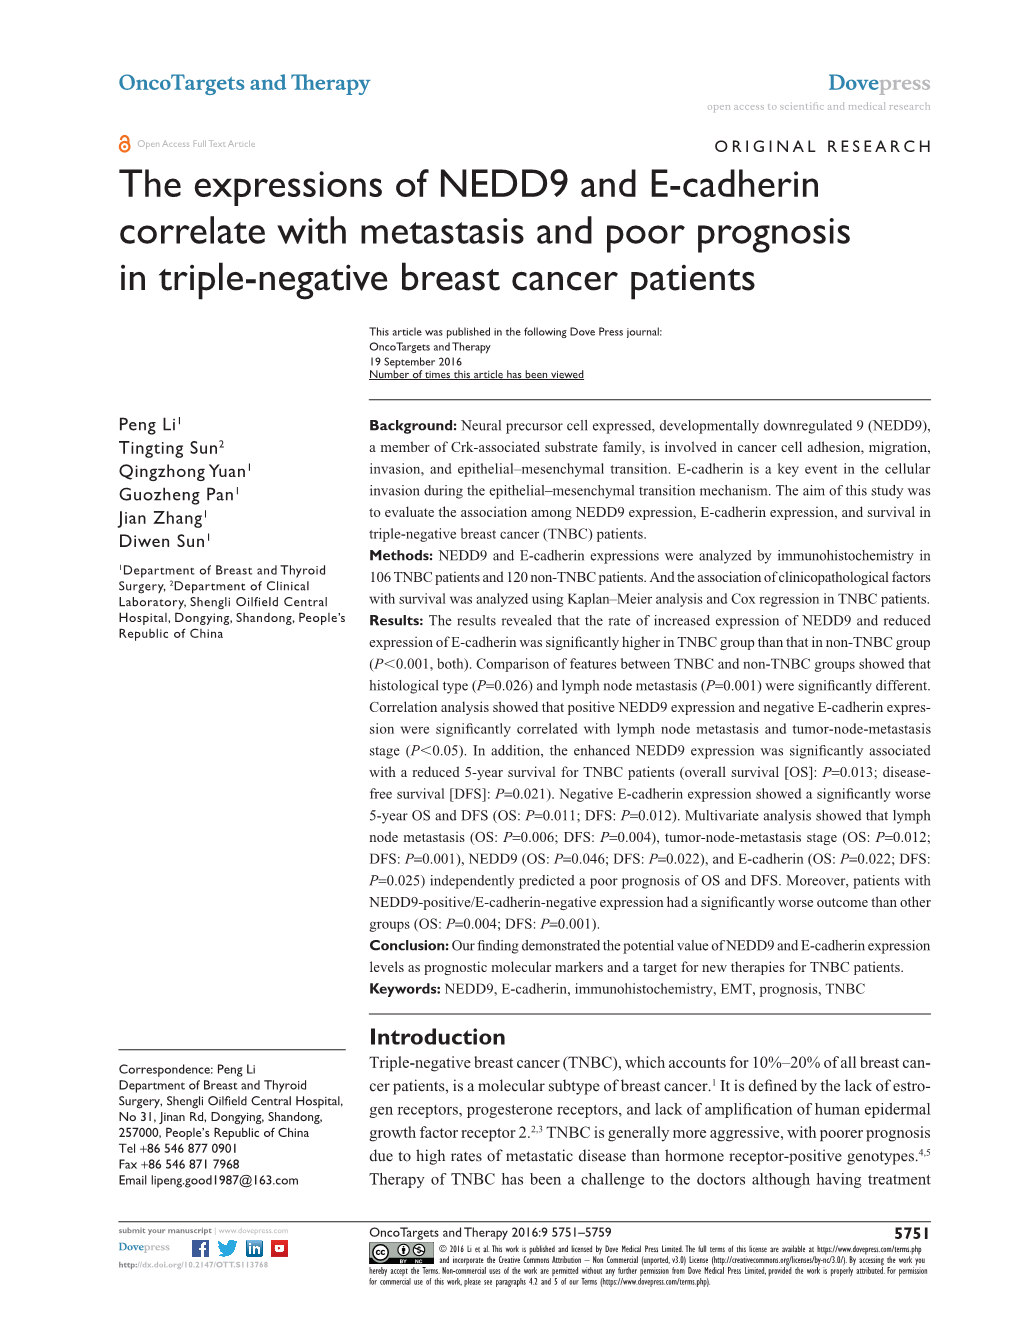 The Expressions of NEDD9 and E-Cadherin Correlate with Metastasis and Poor Prognosis in Triple-Negative Breast Cancer Patients